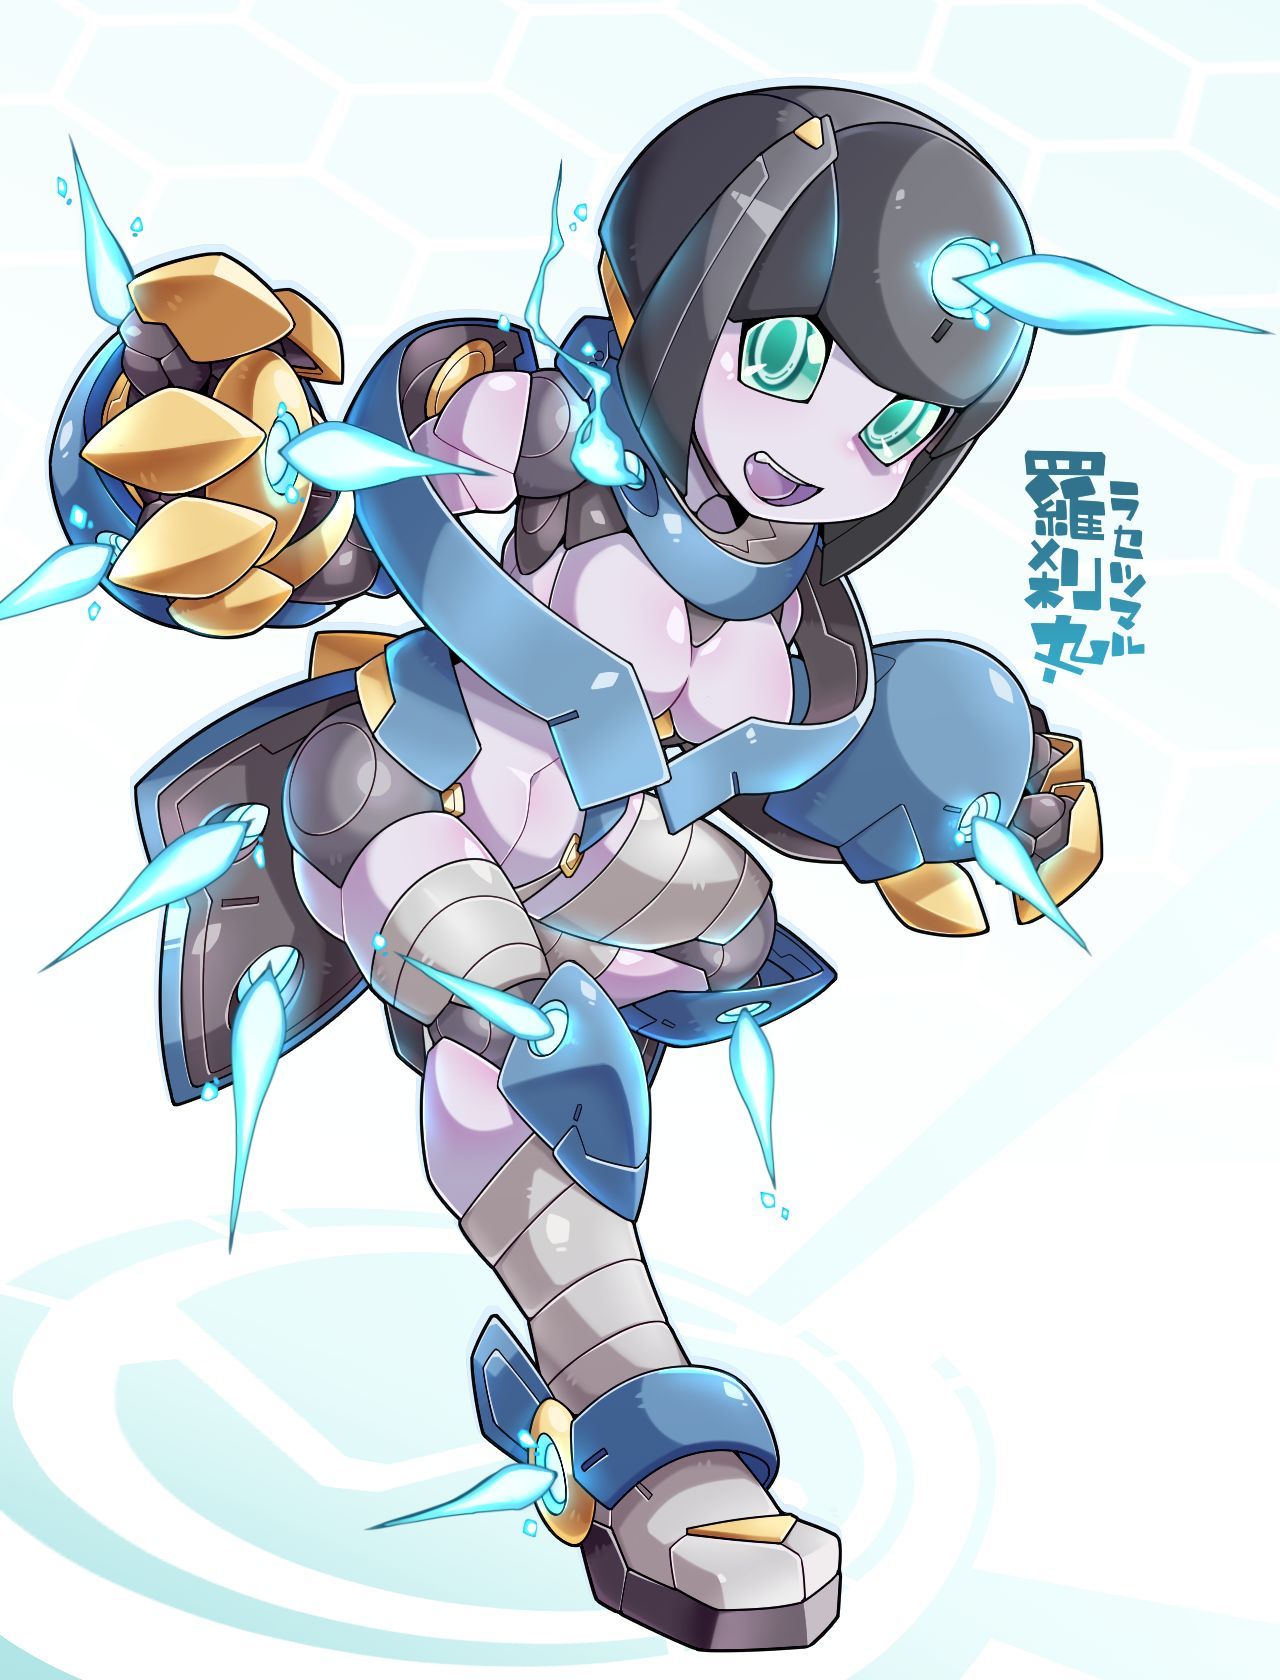 [Pixiv] kni-droid (Kにぃー, weis2626) (Pixiv ID: 1937581) 22